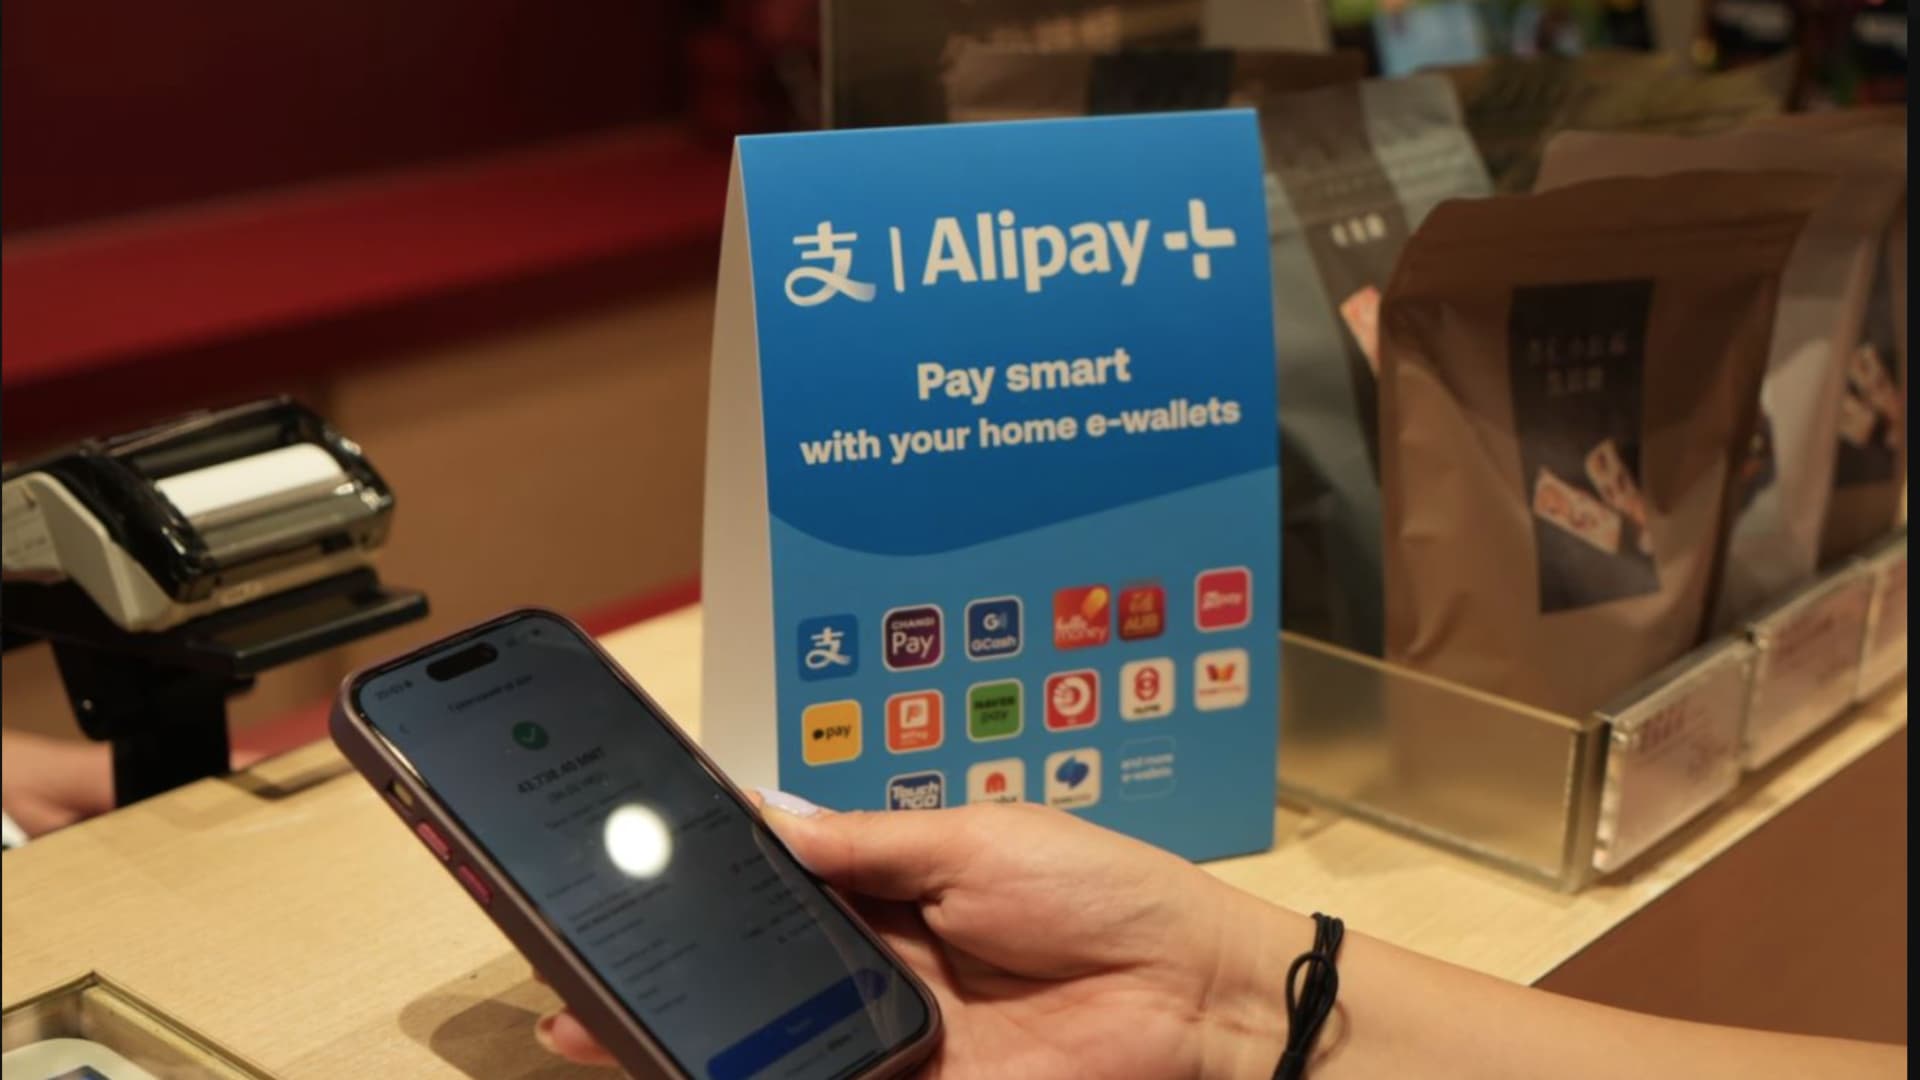 China’s Ant Group doubles down on global expansion with cross-border payments offering Alipay+